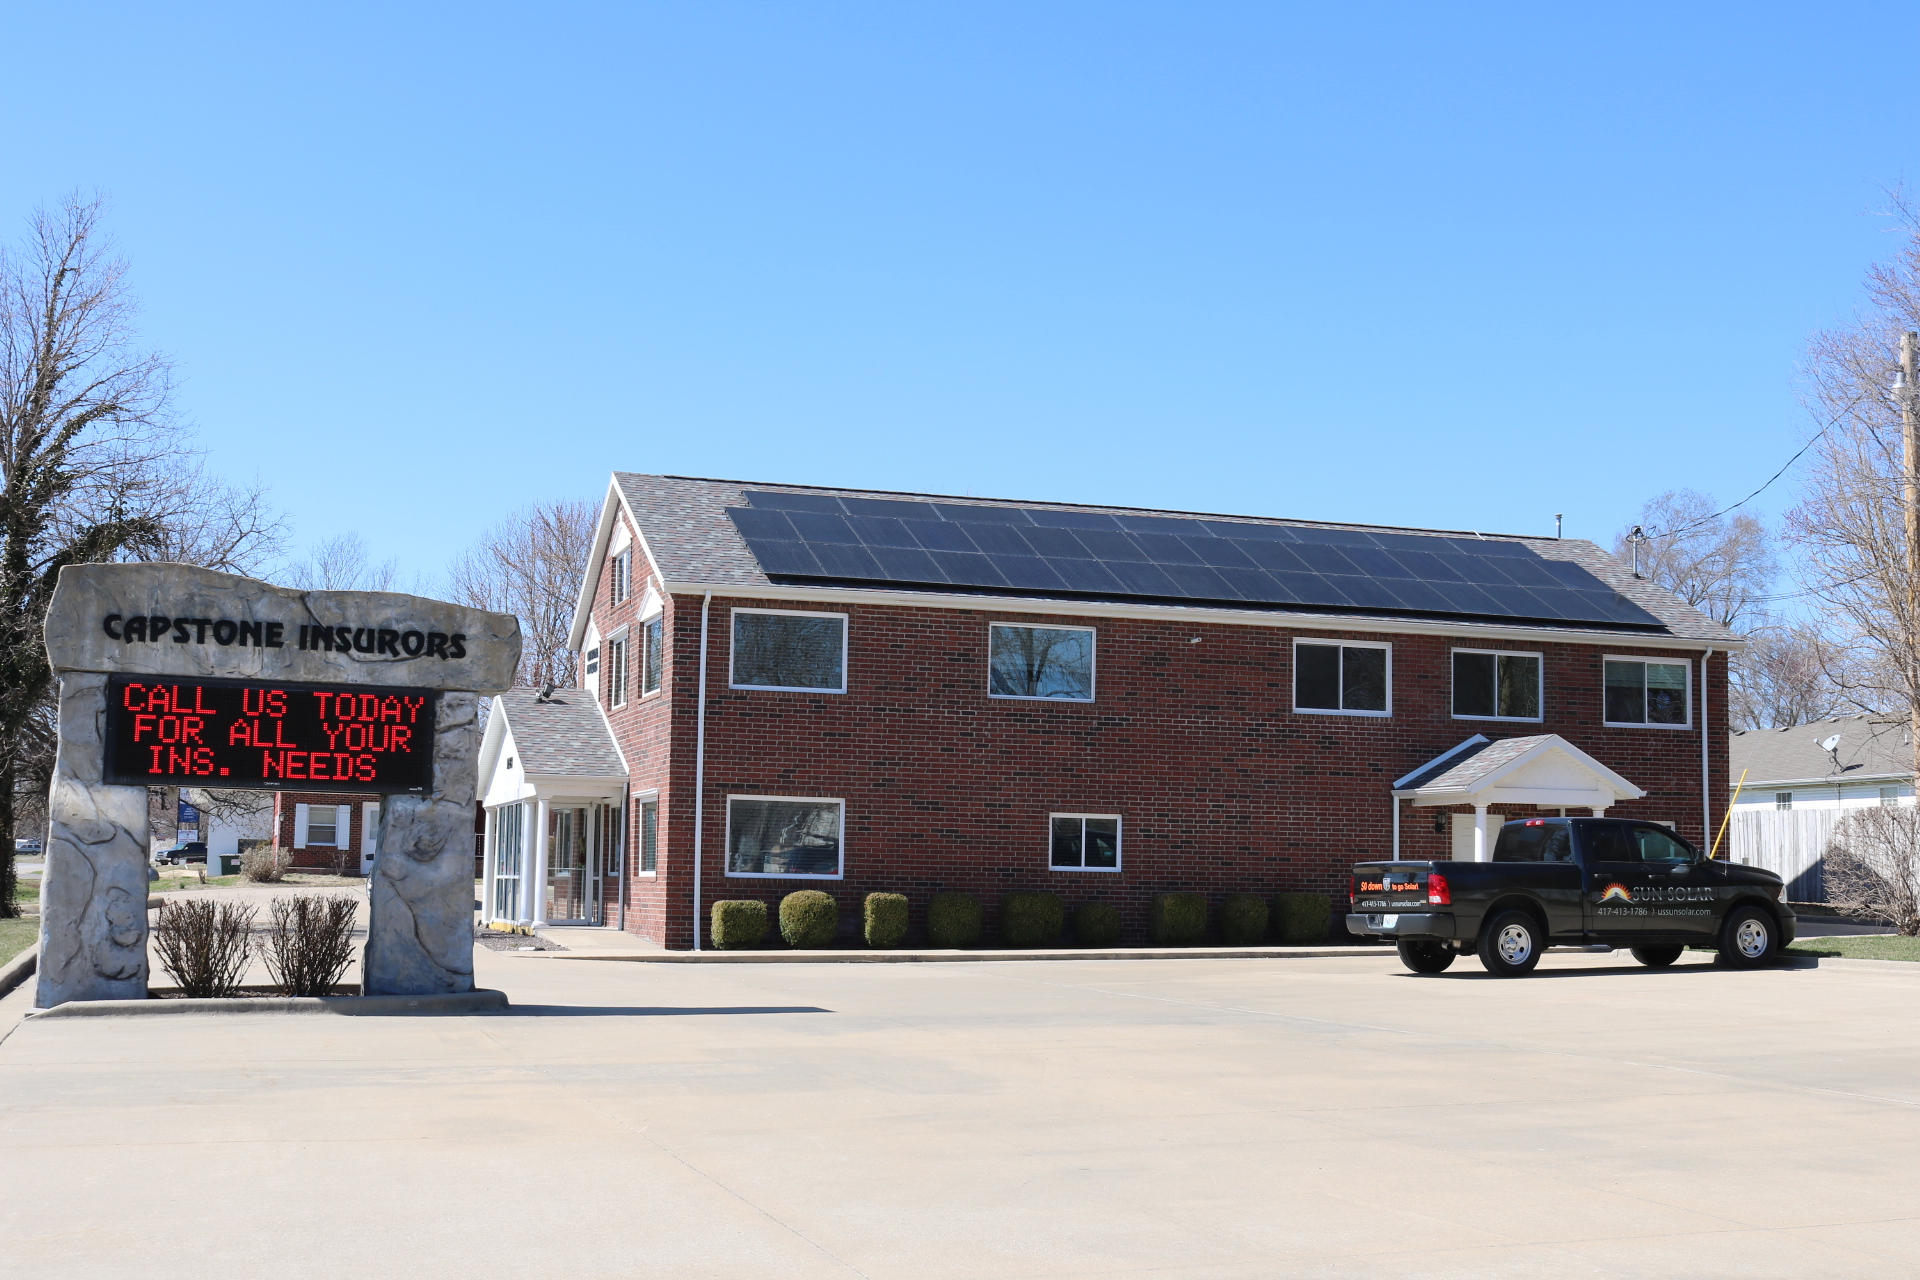 The Capstone Insurors building in Bolivar, MO with an array of solar panels on the roof and a black truck from Sun Solar in the parking lot.